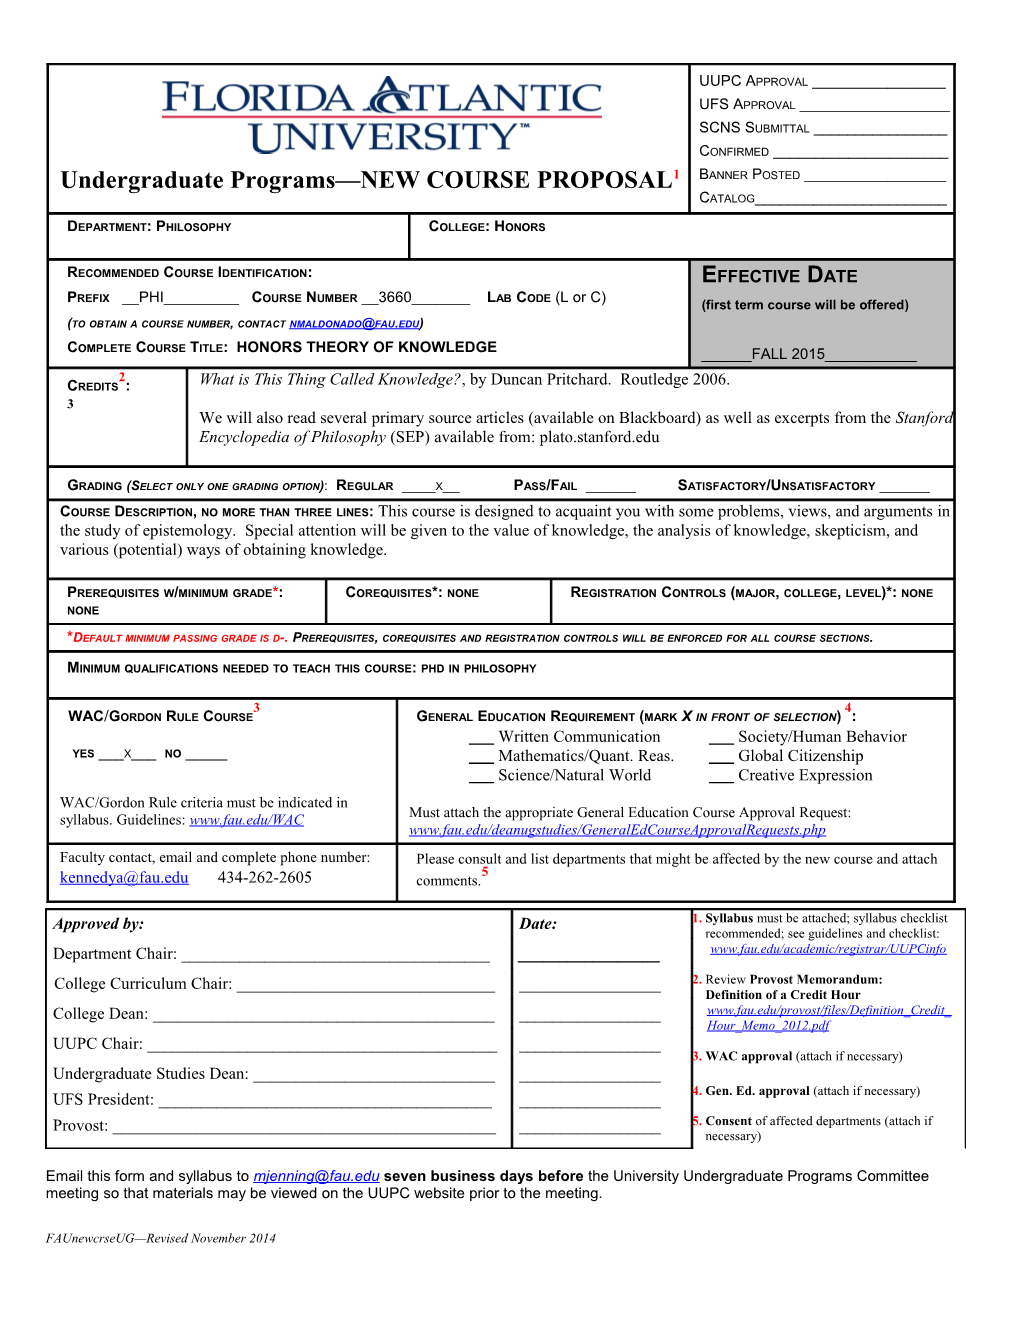 CD037, Course Termination Or Change Transmittal Form s13